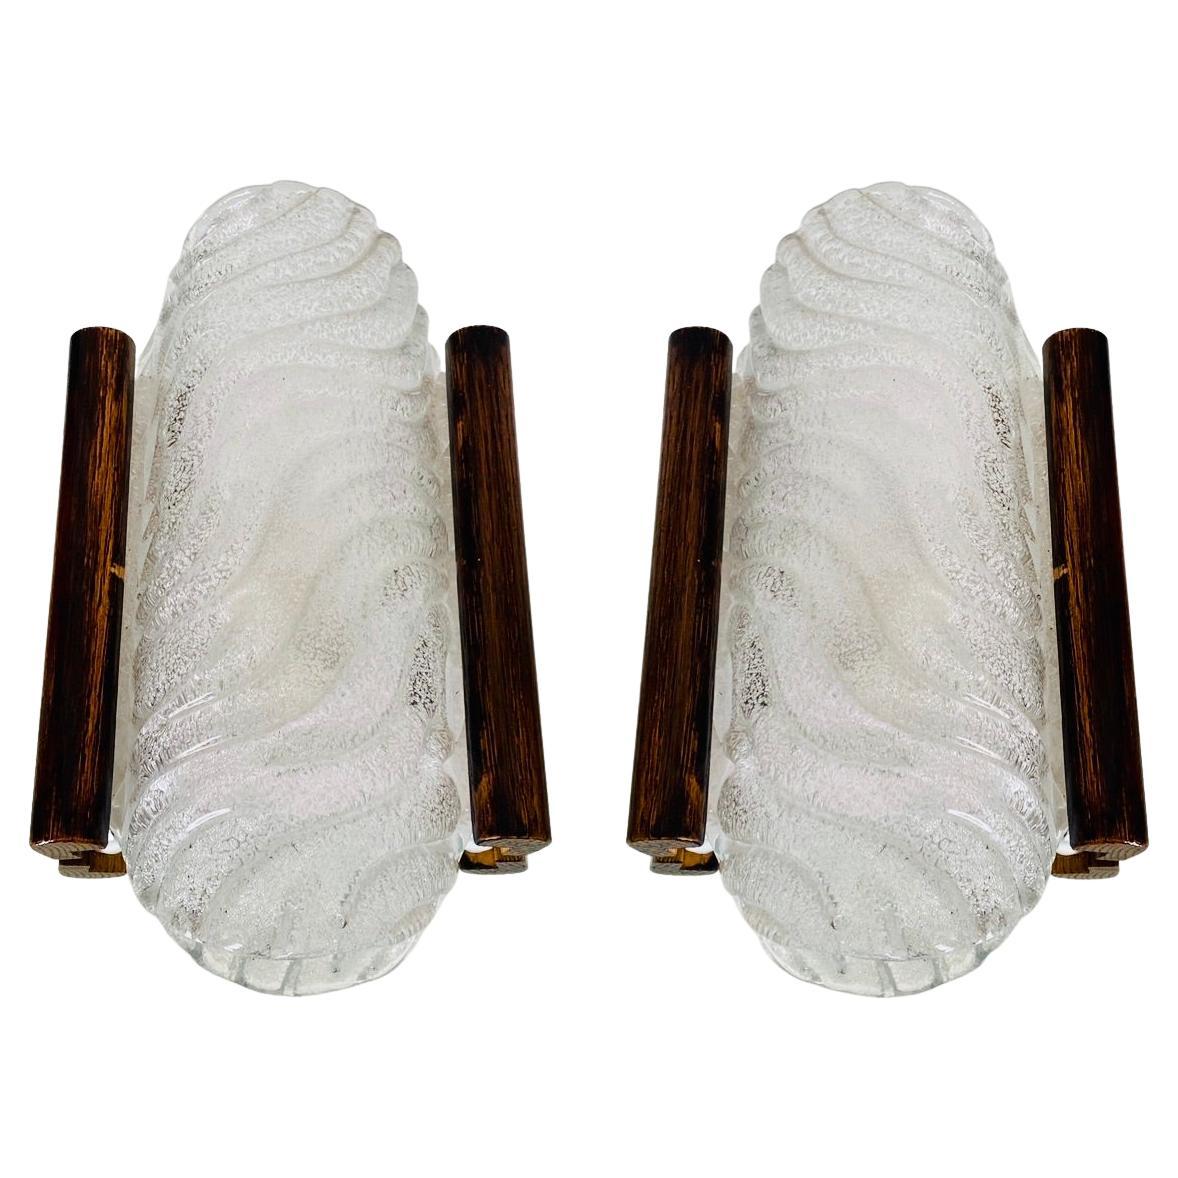 Pair of Barovier & Toso Murano Glass Sconces with Wood Frame, Italy c. 1950